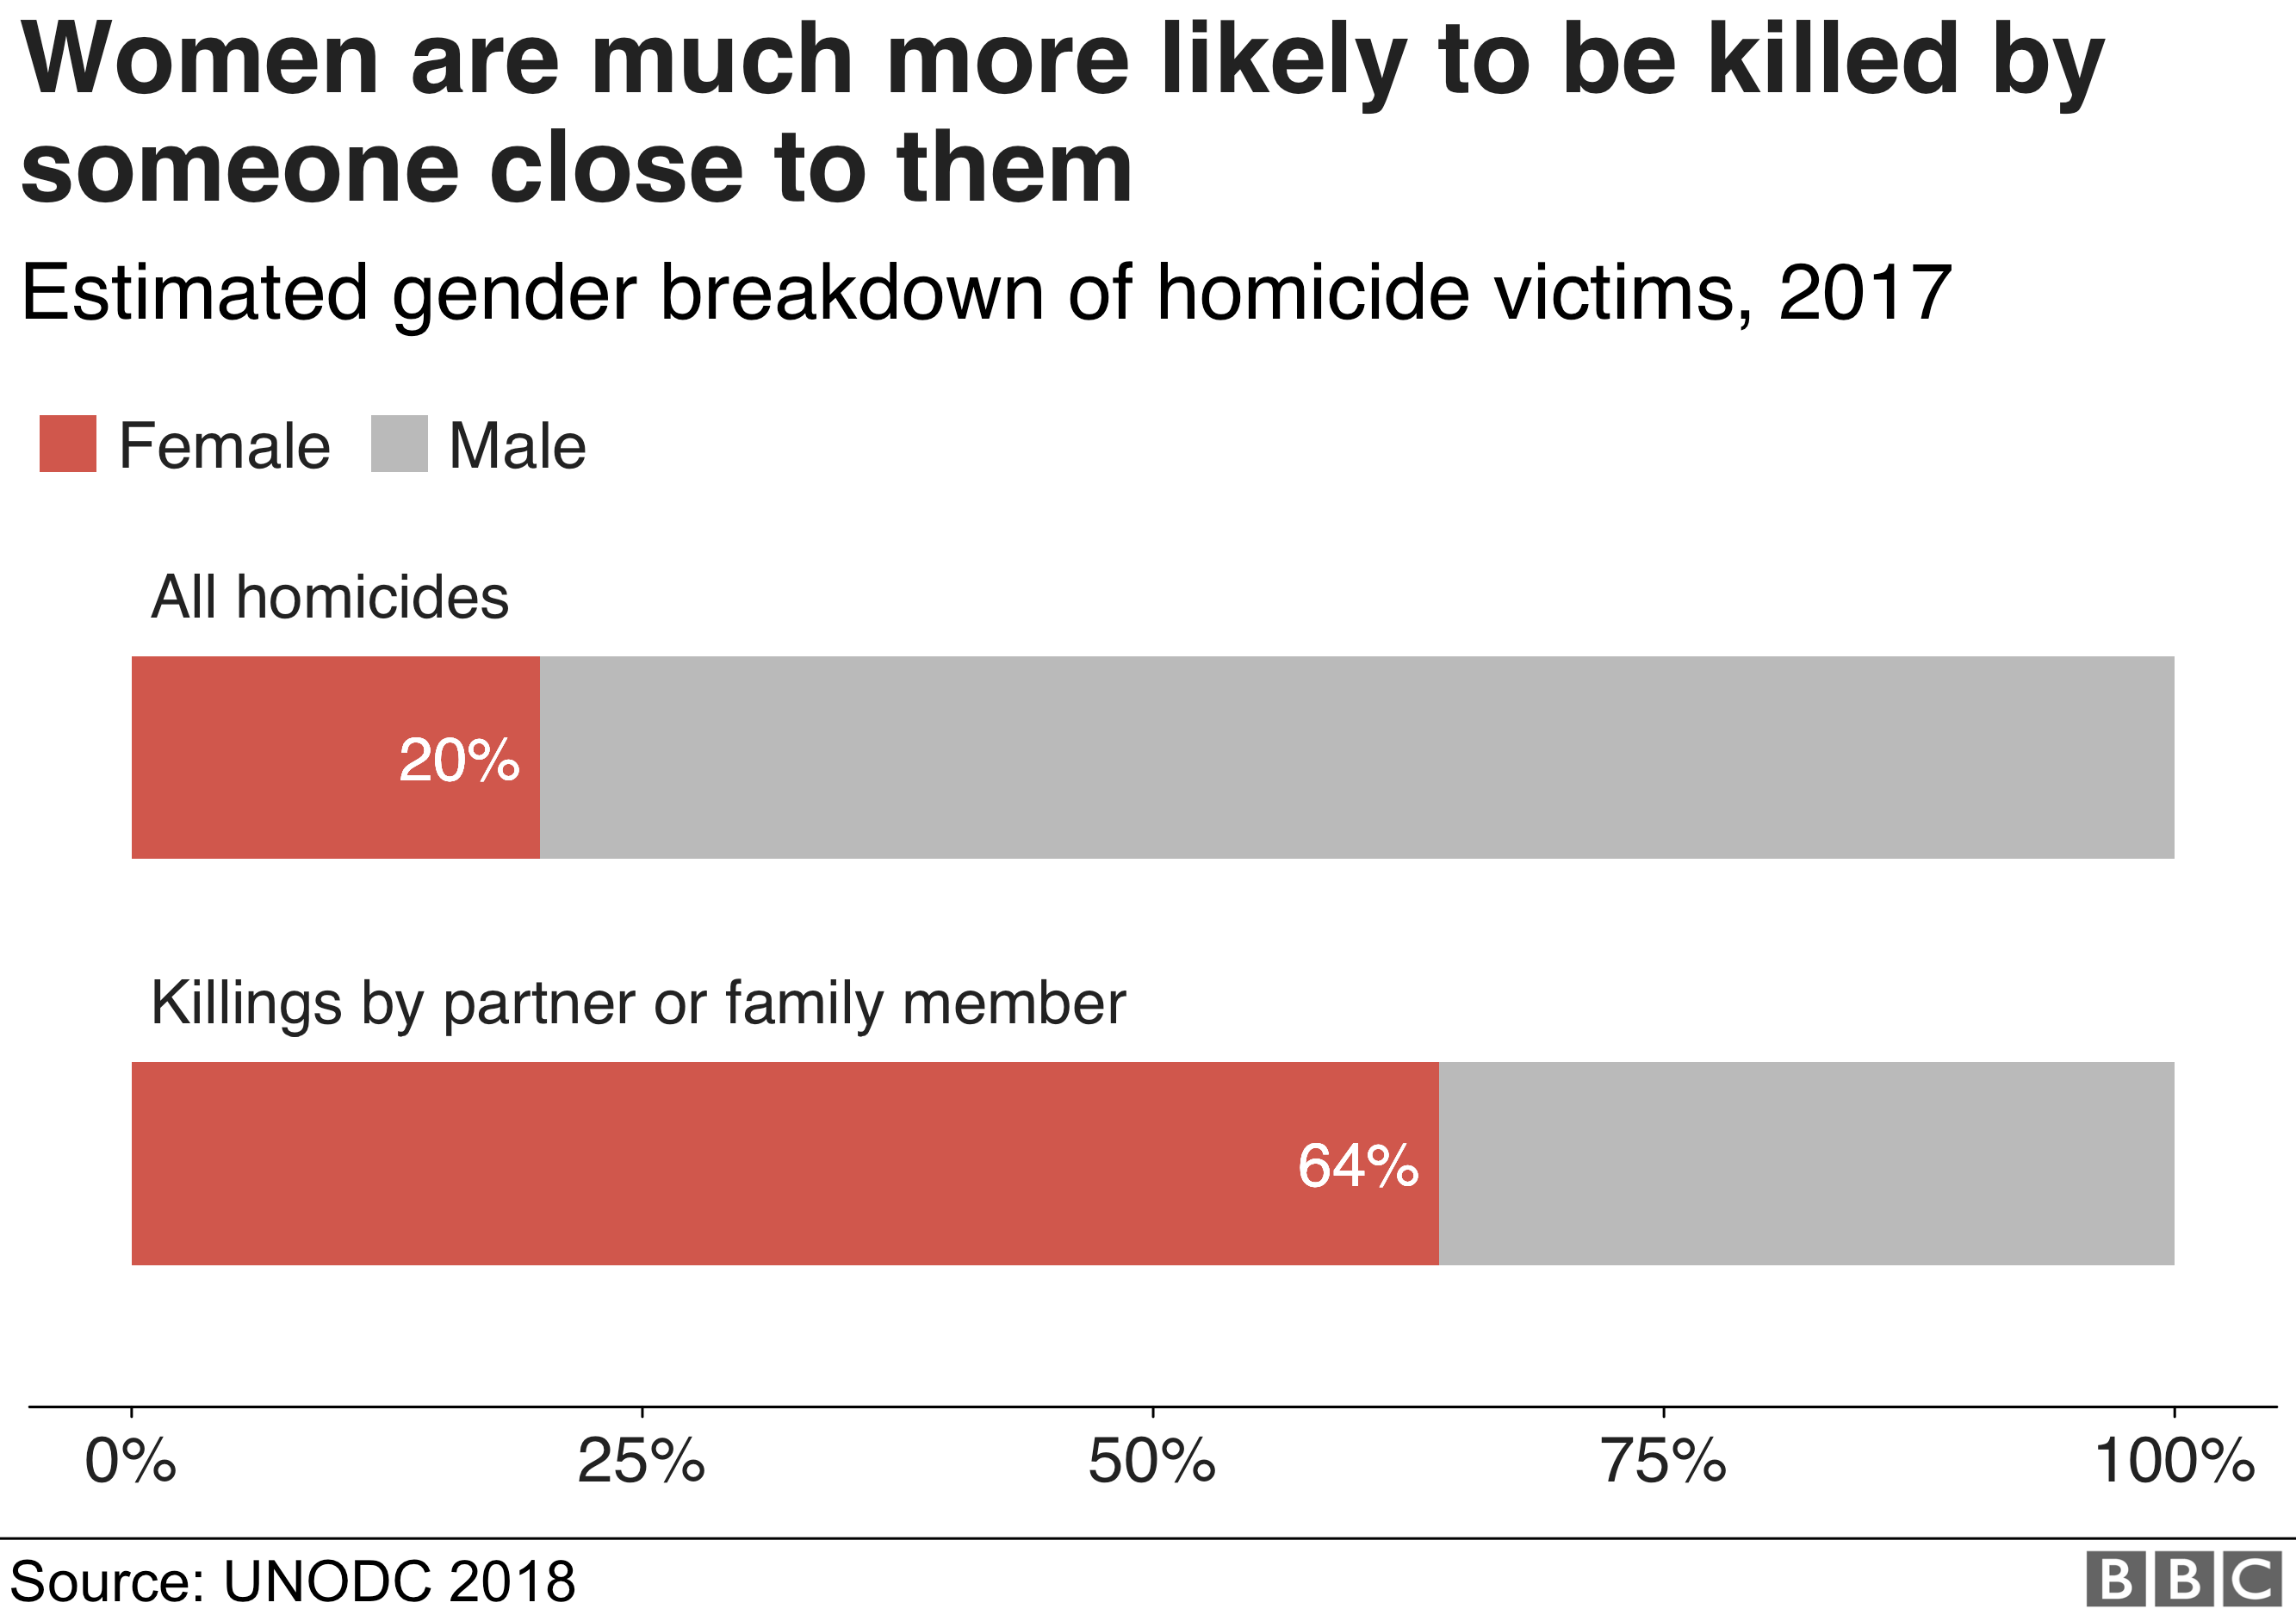 Women are much more likely to be killed by someone close to them